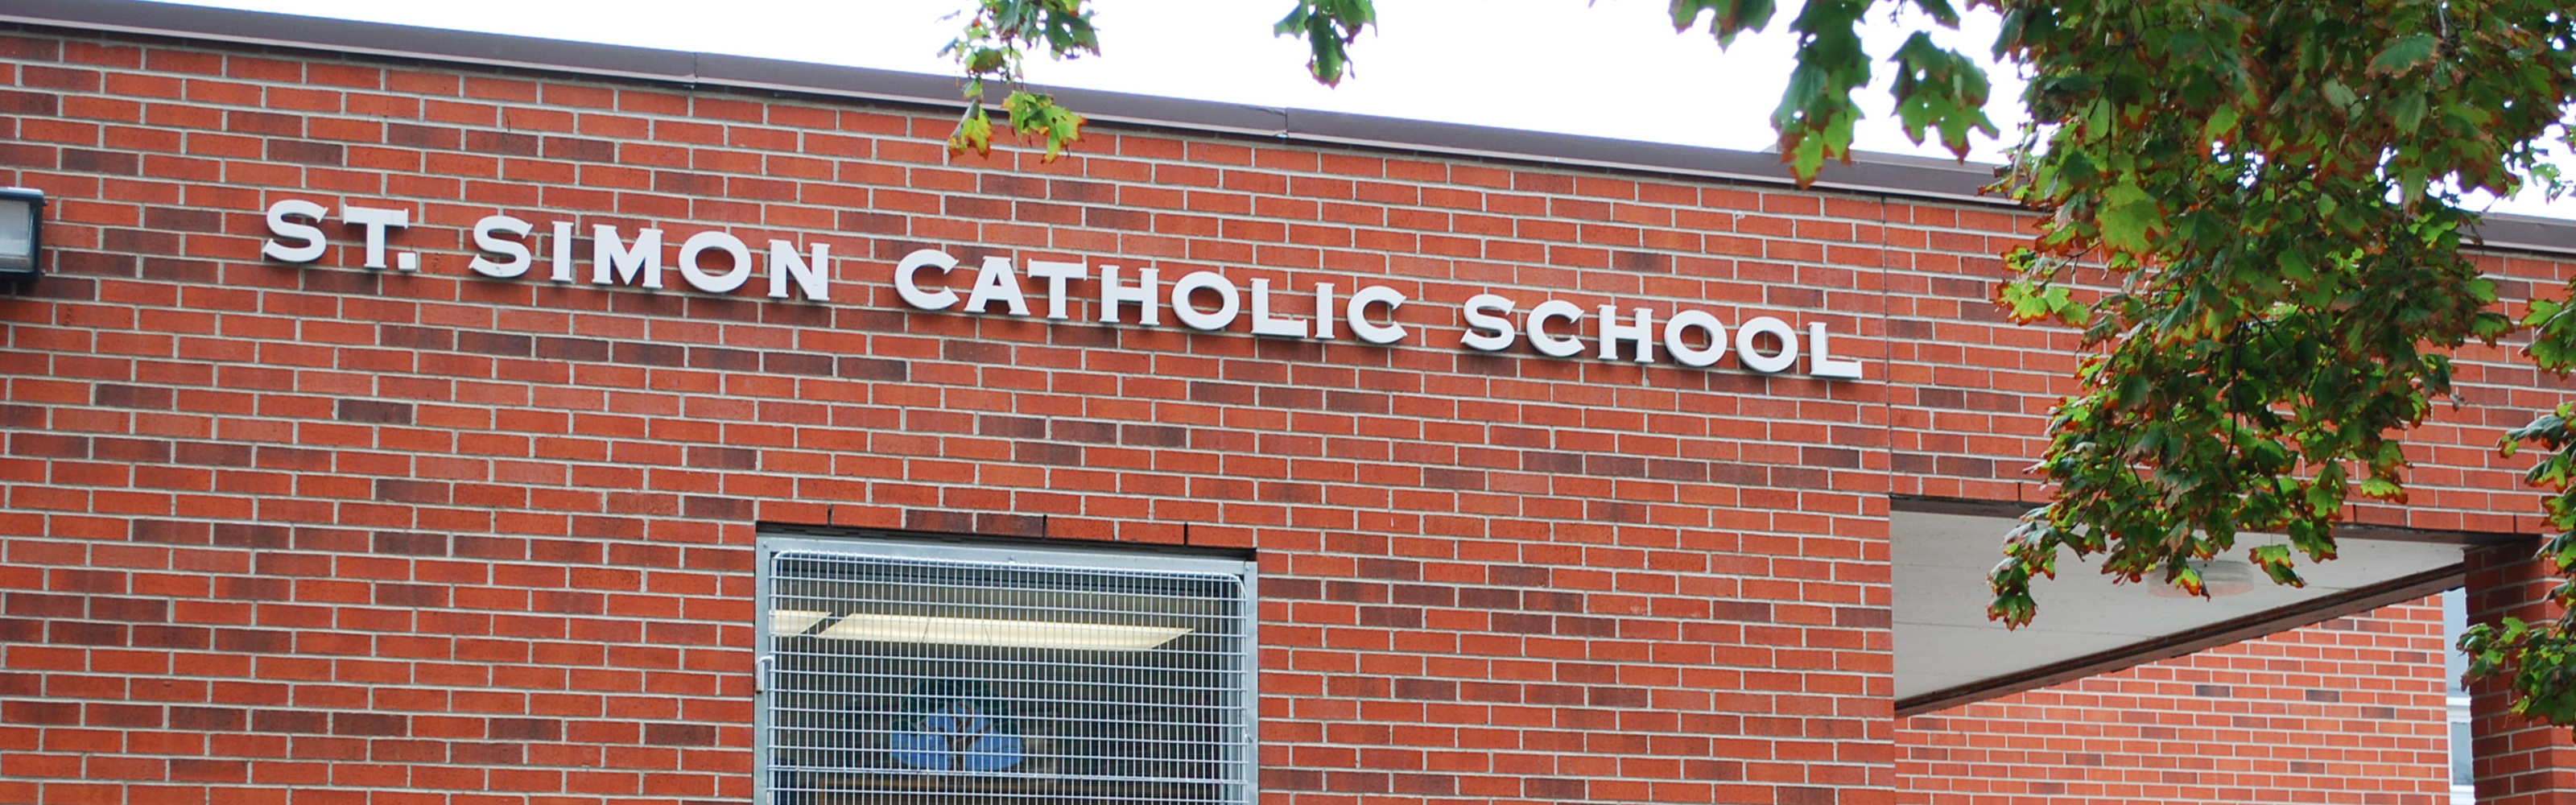 The front of the St. Simon Catholic School building.